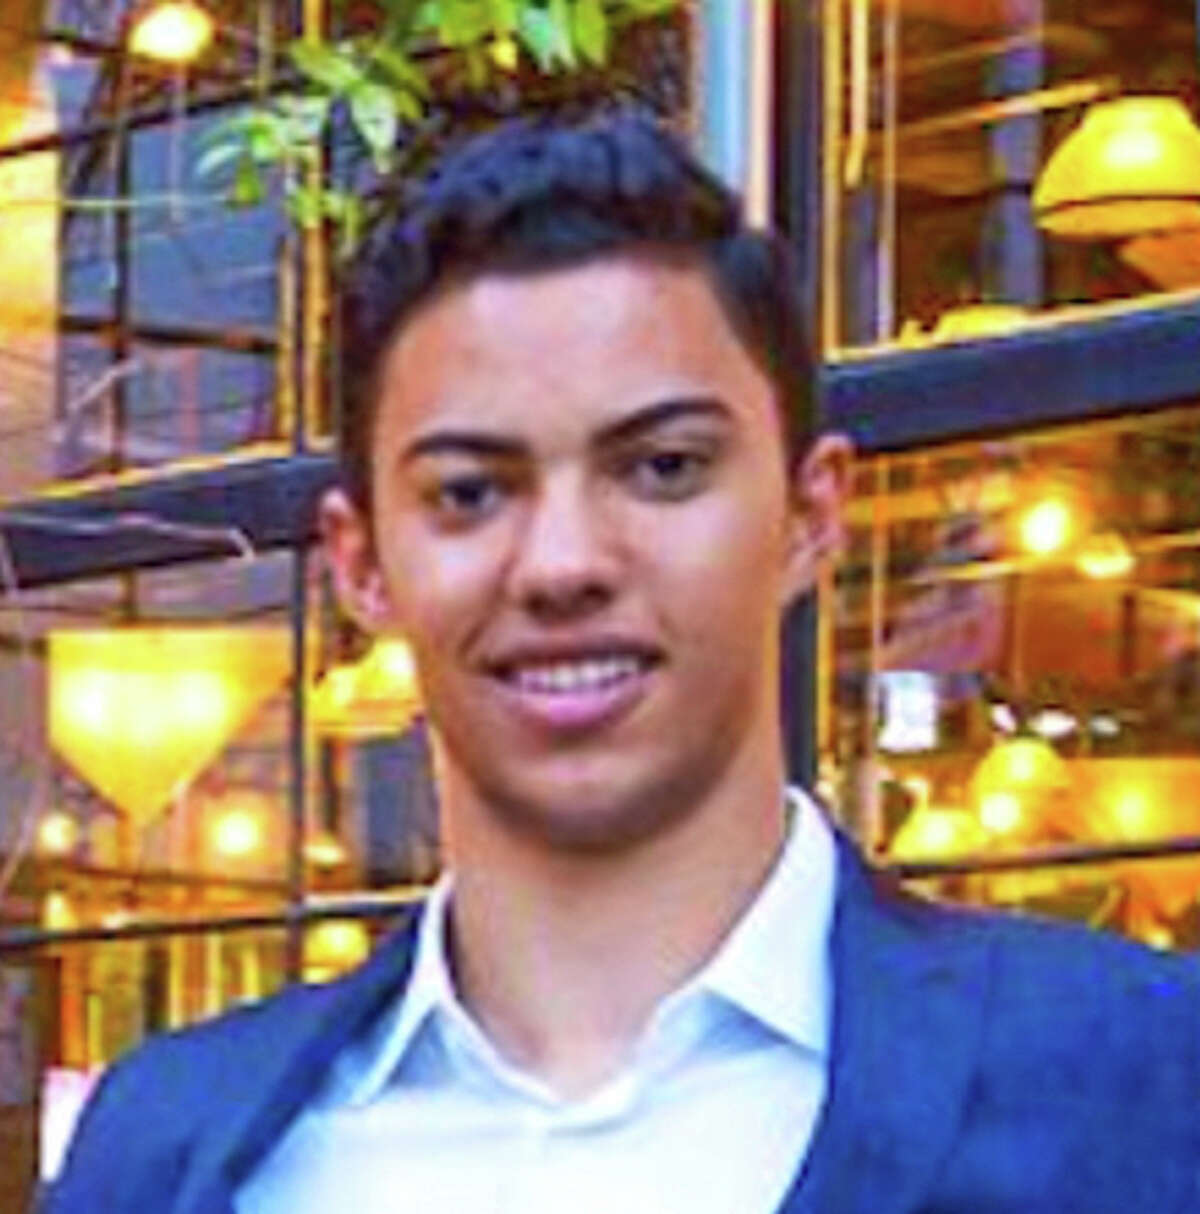 Nick Leslie, a UC Berkeley student, was missing after the terror rampage in Nice, France.